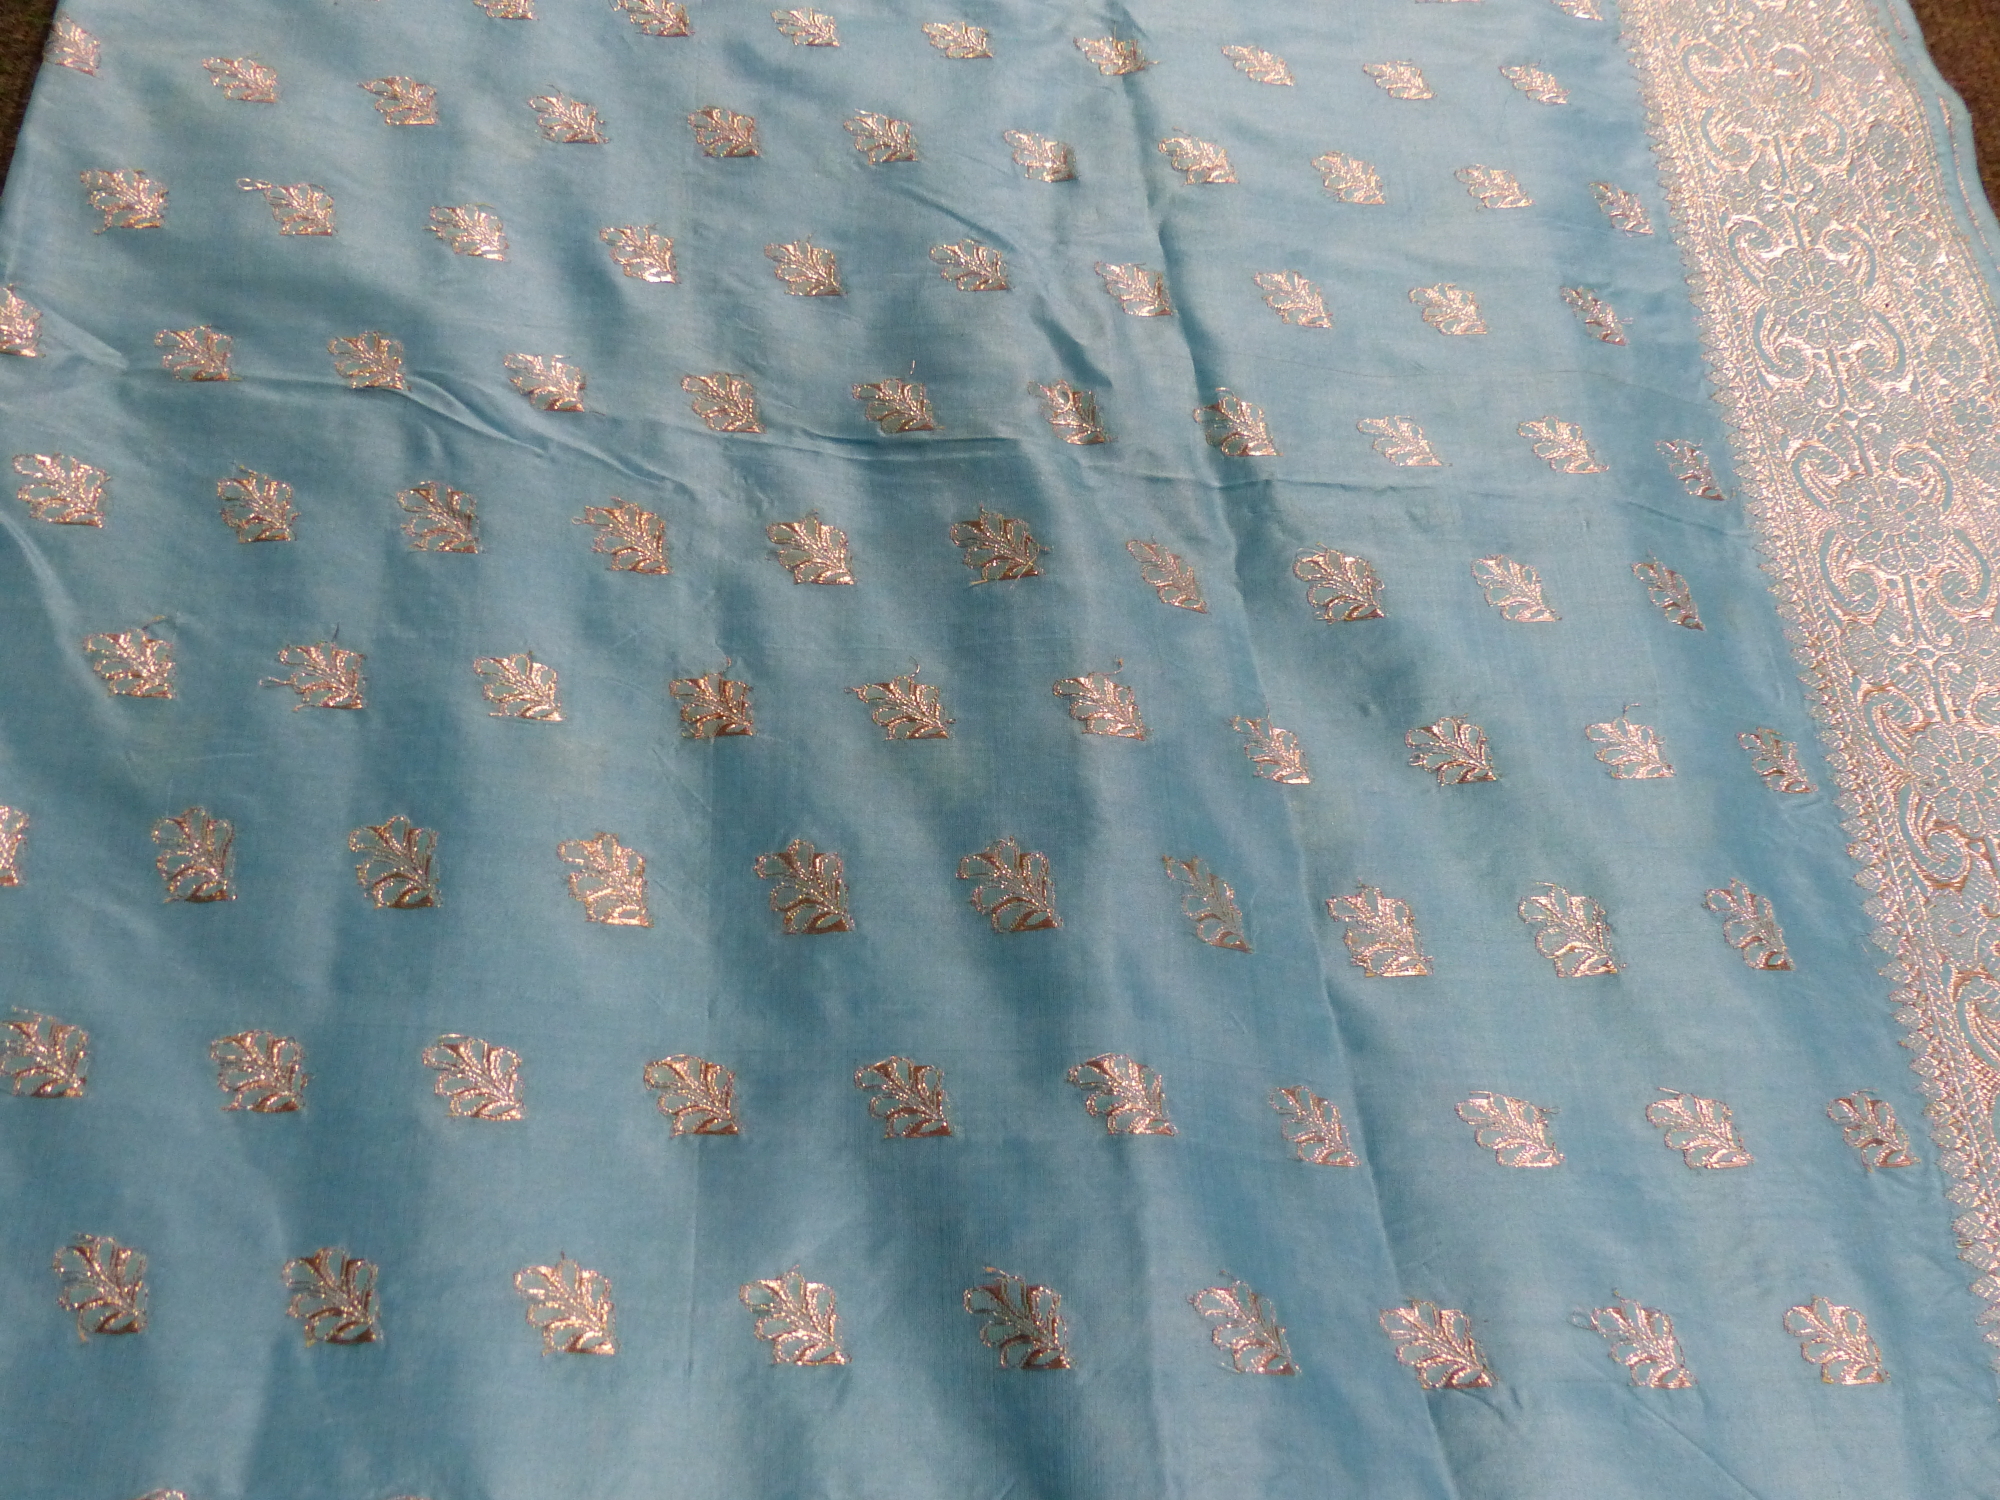 TWO EASTERN PANELS TOGETHER WITH SILK SARI - Image 6 of 14